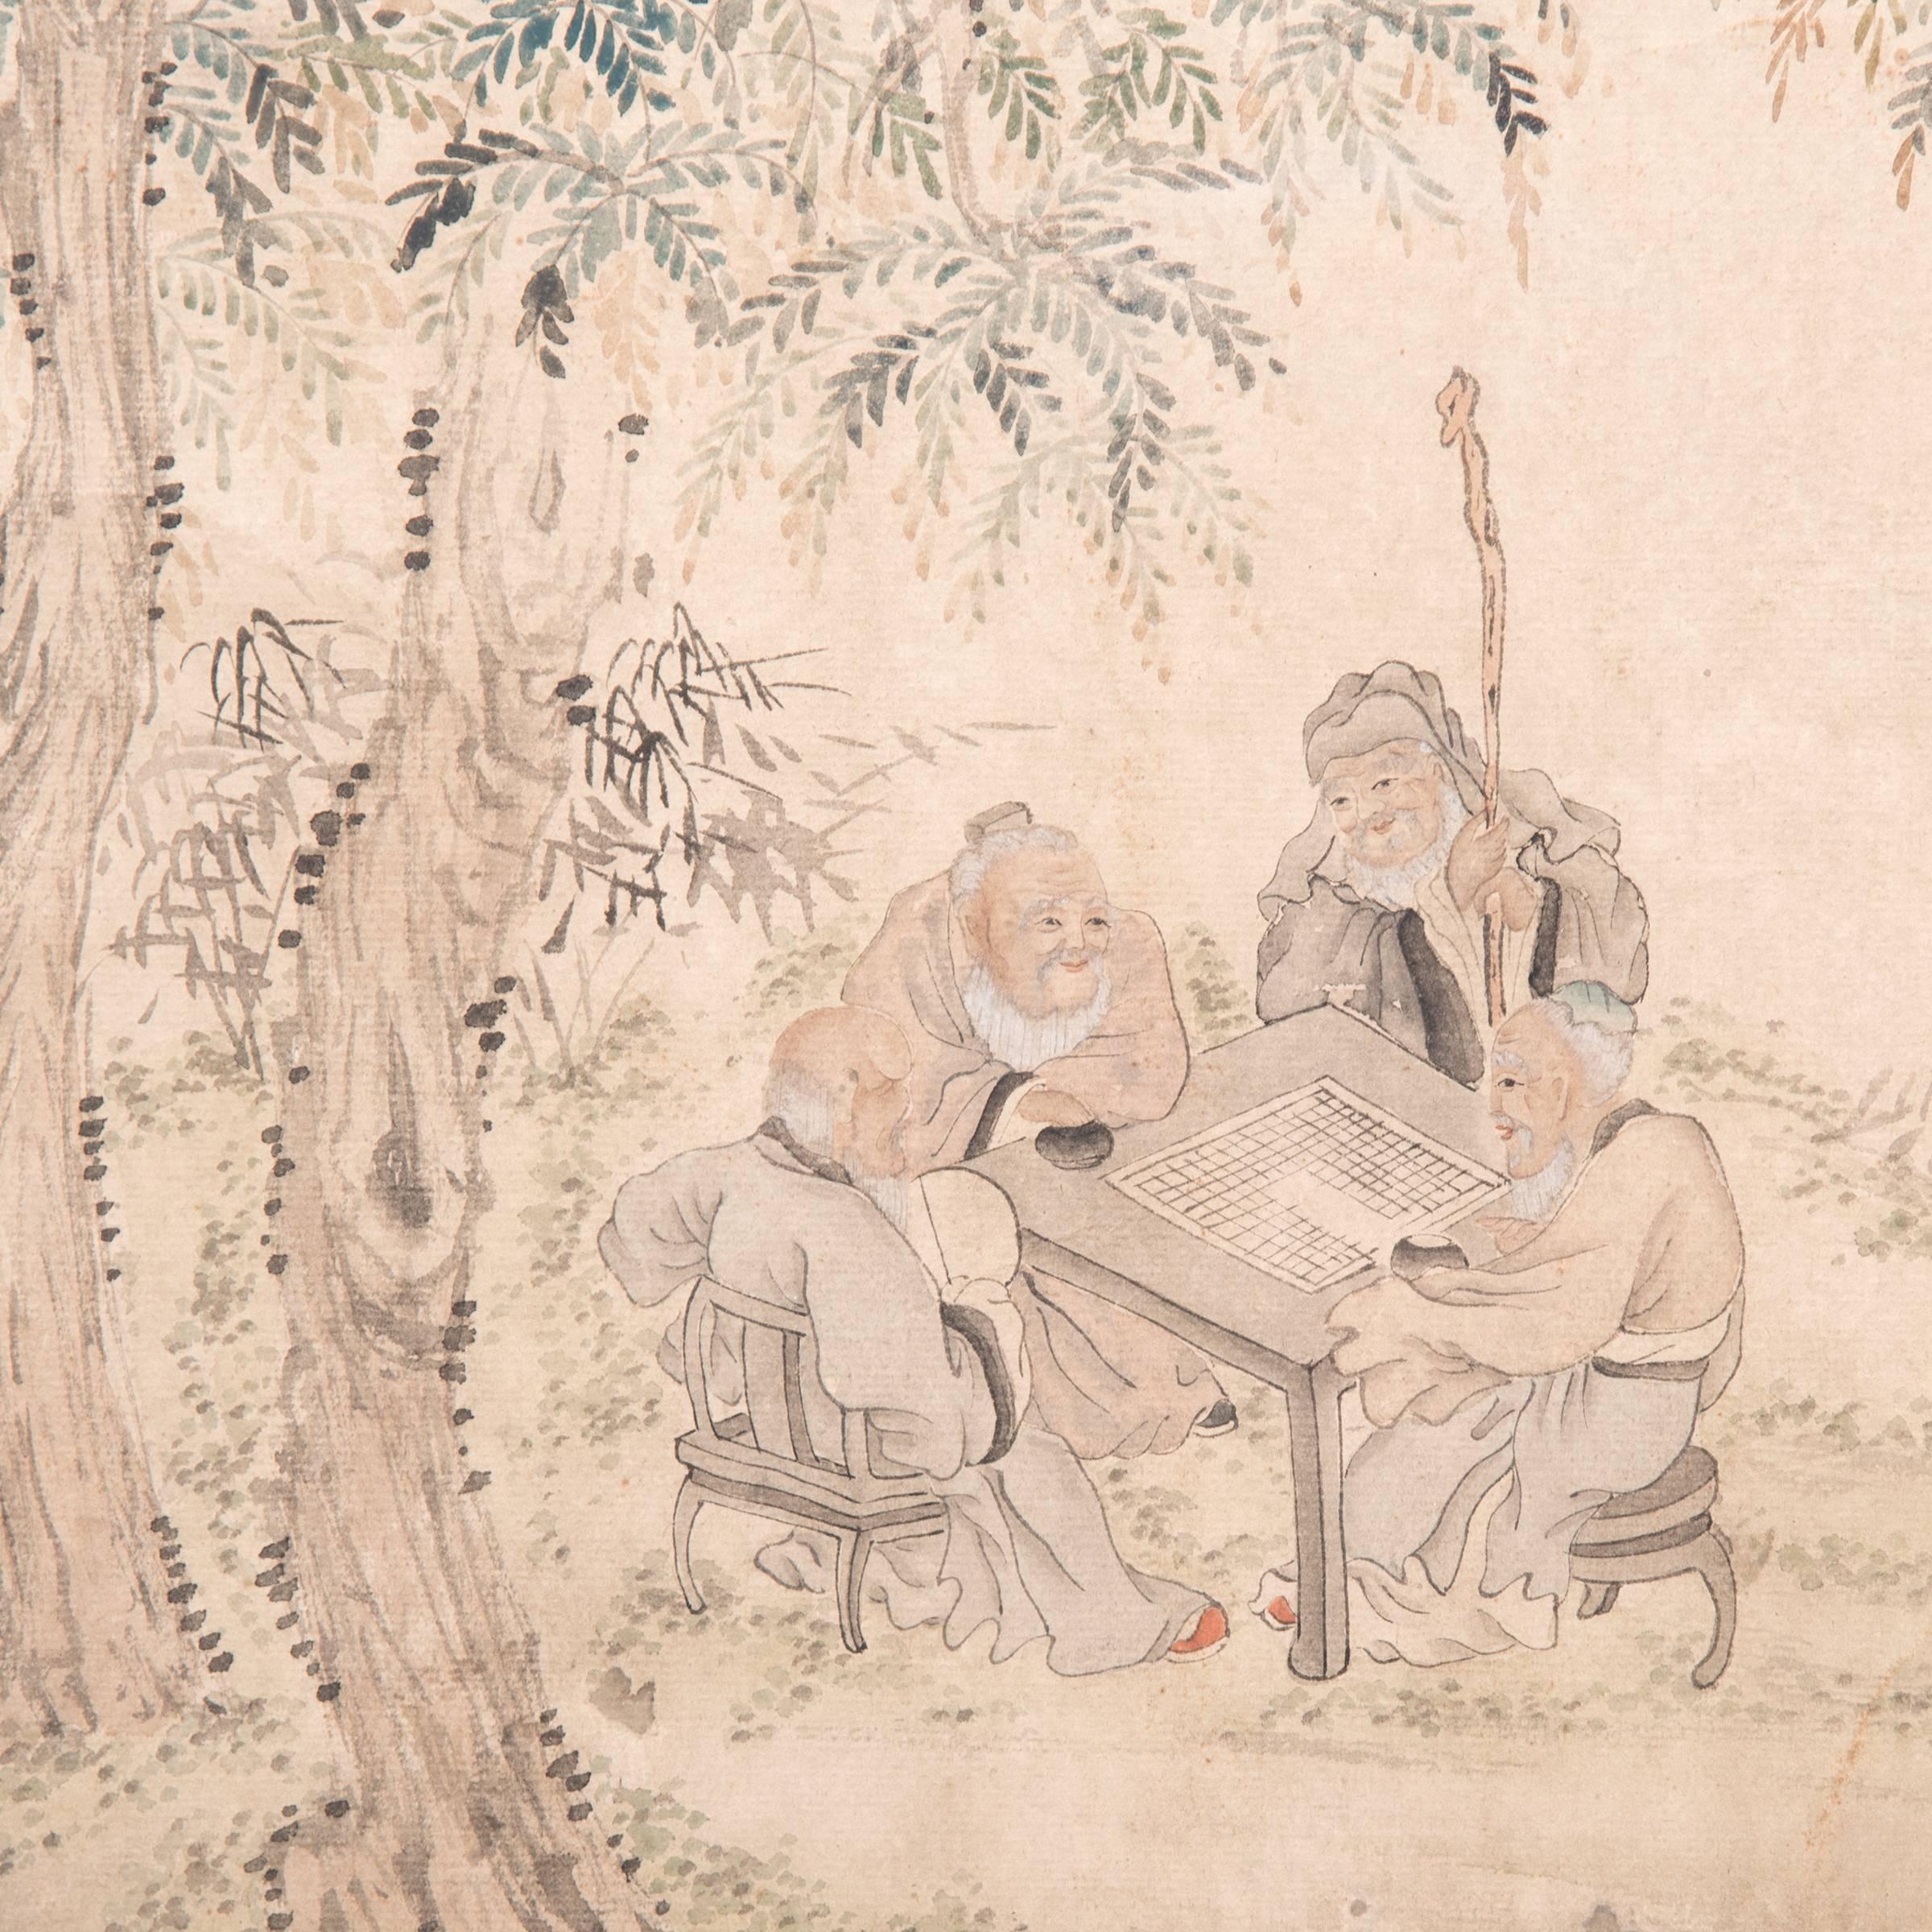 Recently spied in Shanghai, this northern Chinese painting dates from circa 1900. Delicately rendered in ink, the work depicts a group of men enjoying a summer day by playing a game of Go. Also known as weiqi, this ancient game of strategy was